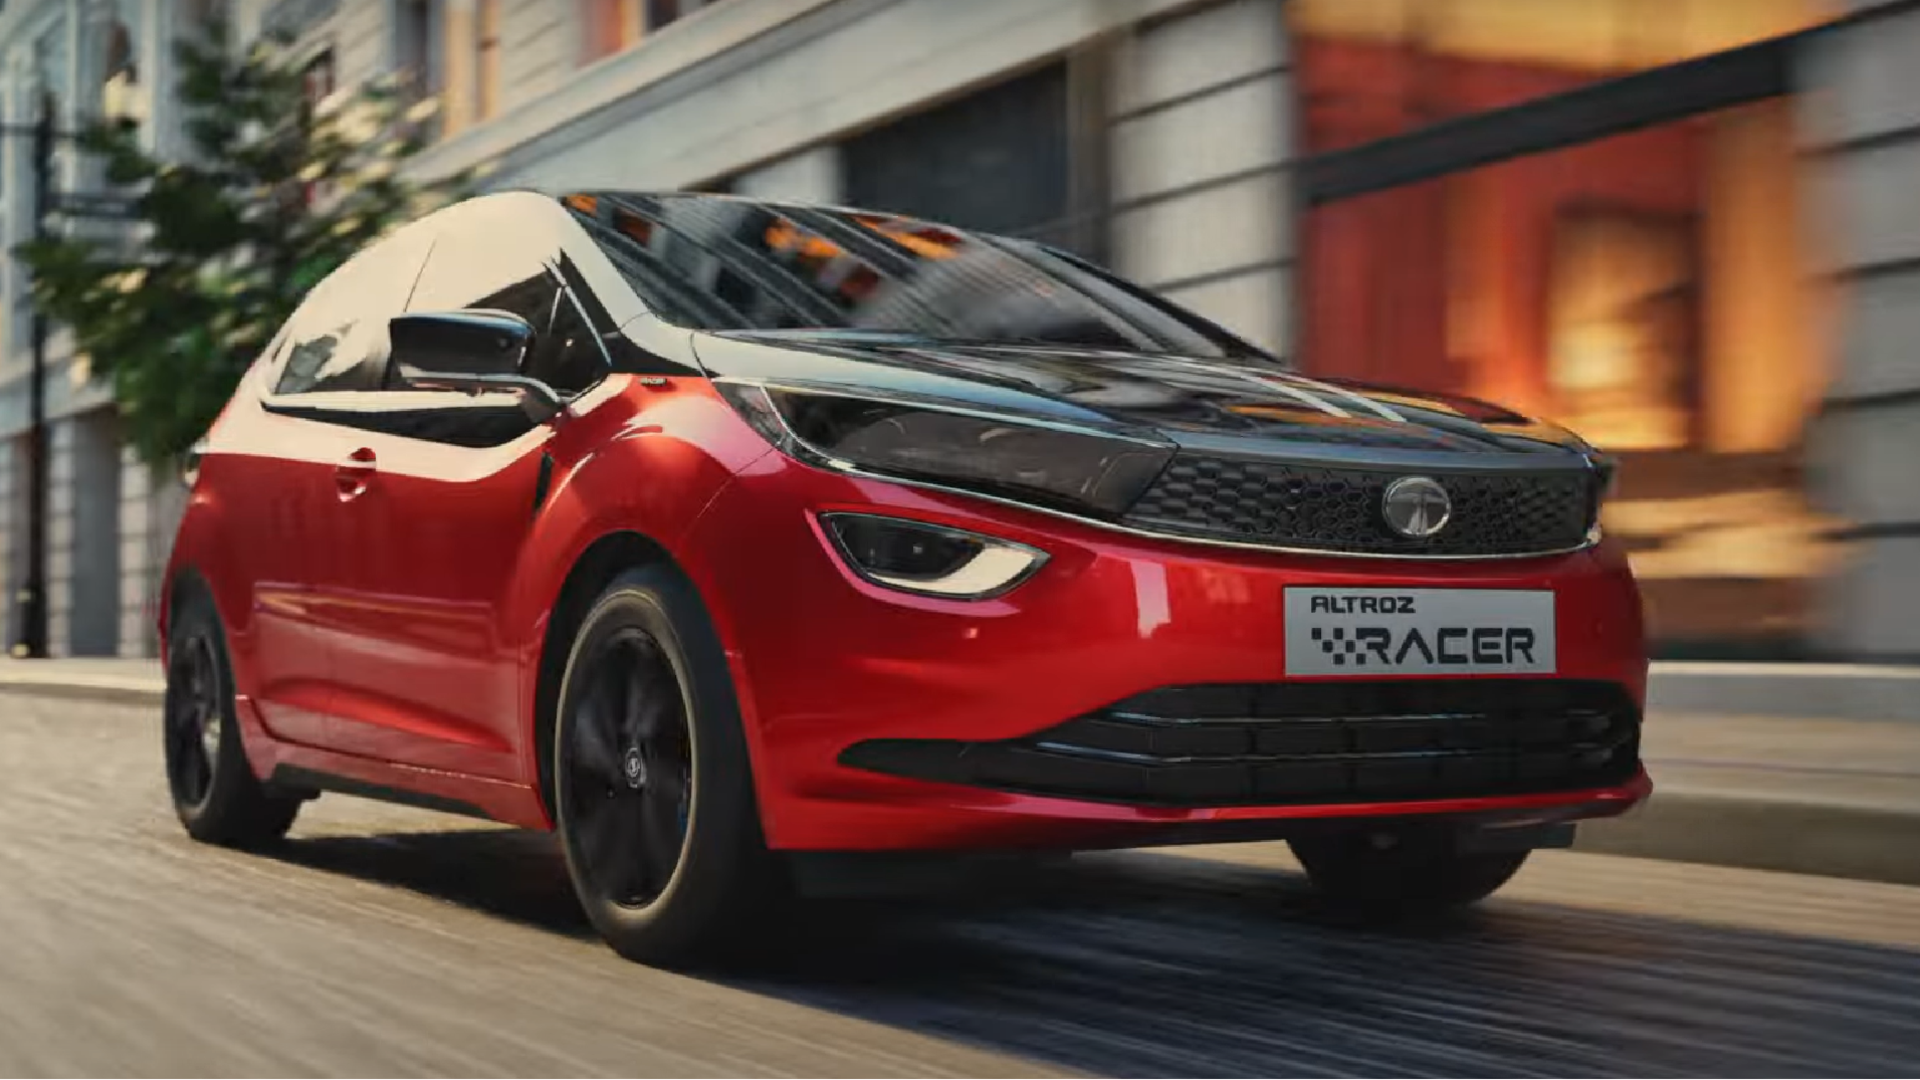 Tata Altroz Racer performance hatchback: Check out its top features